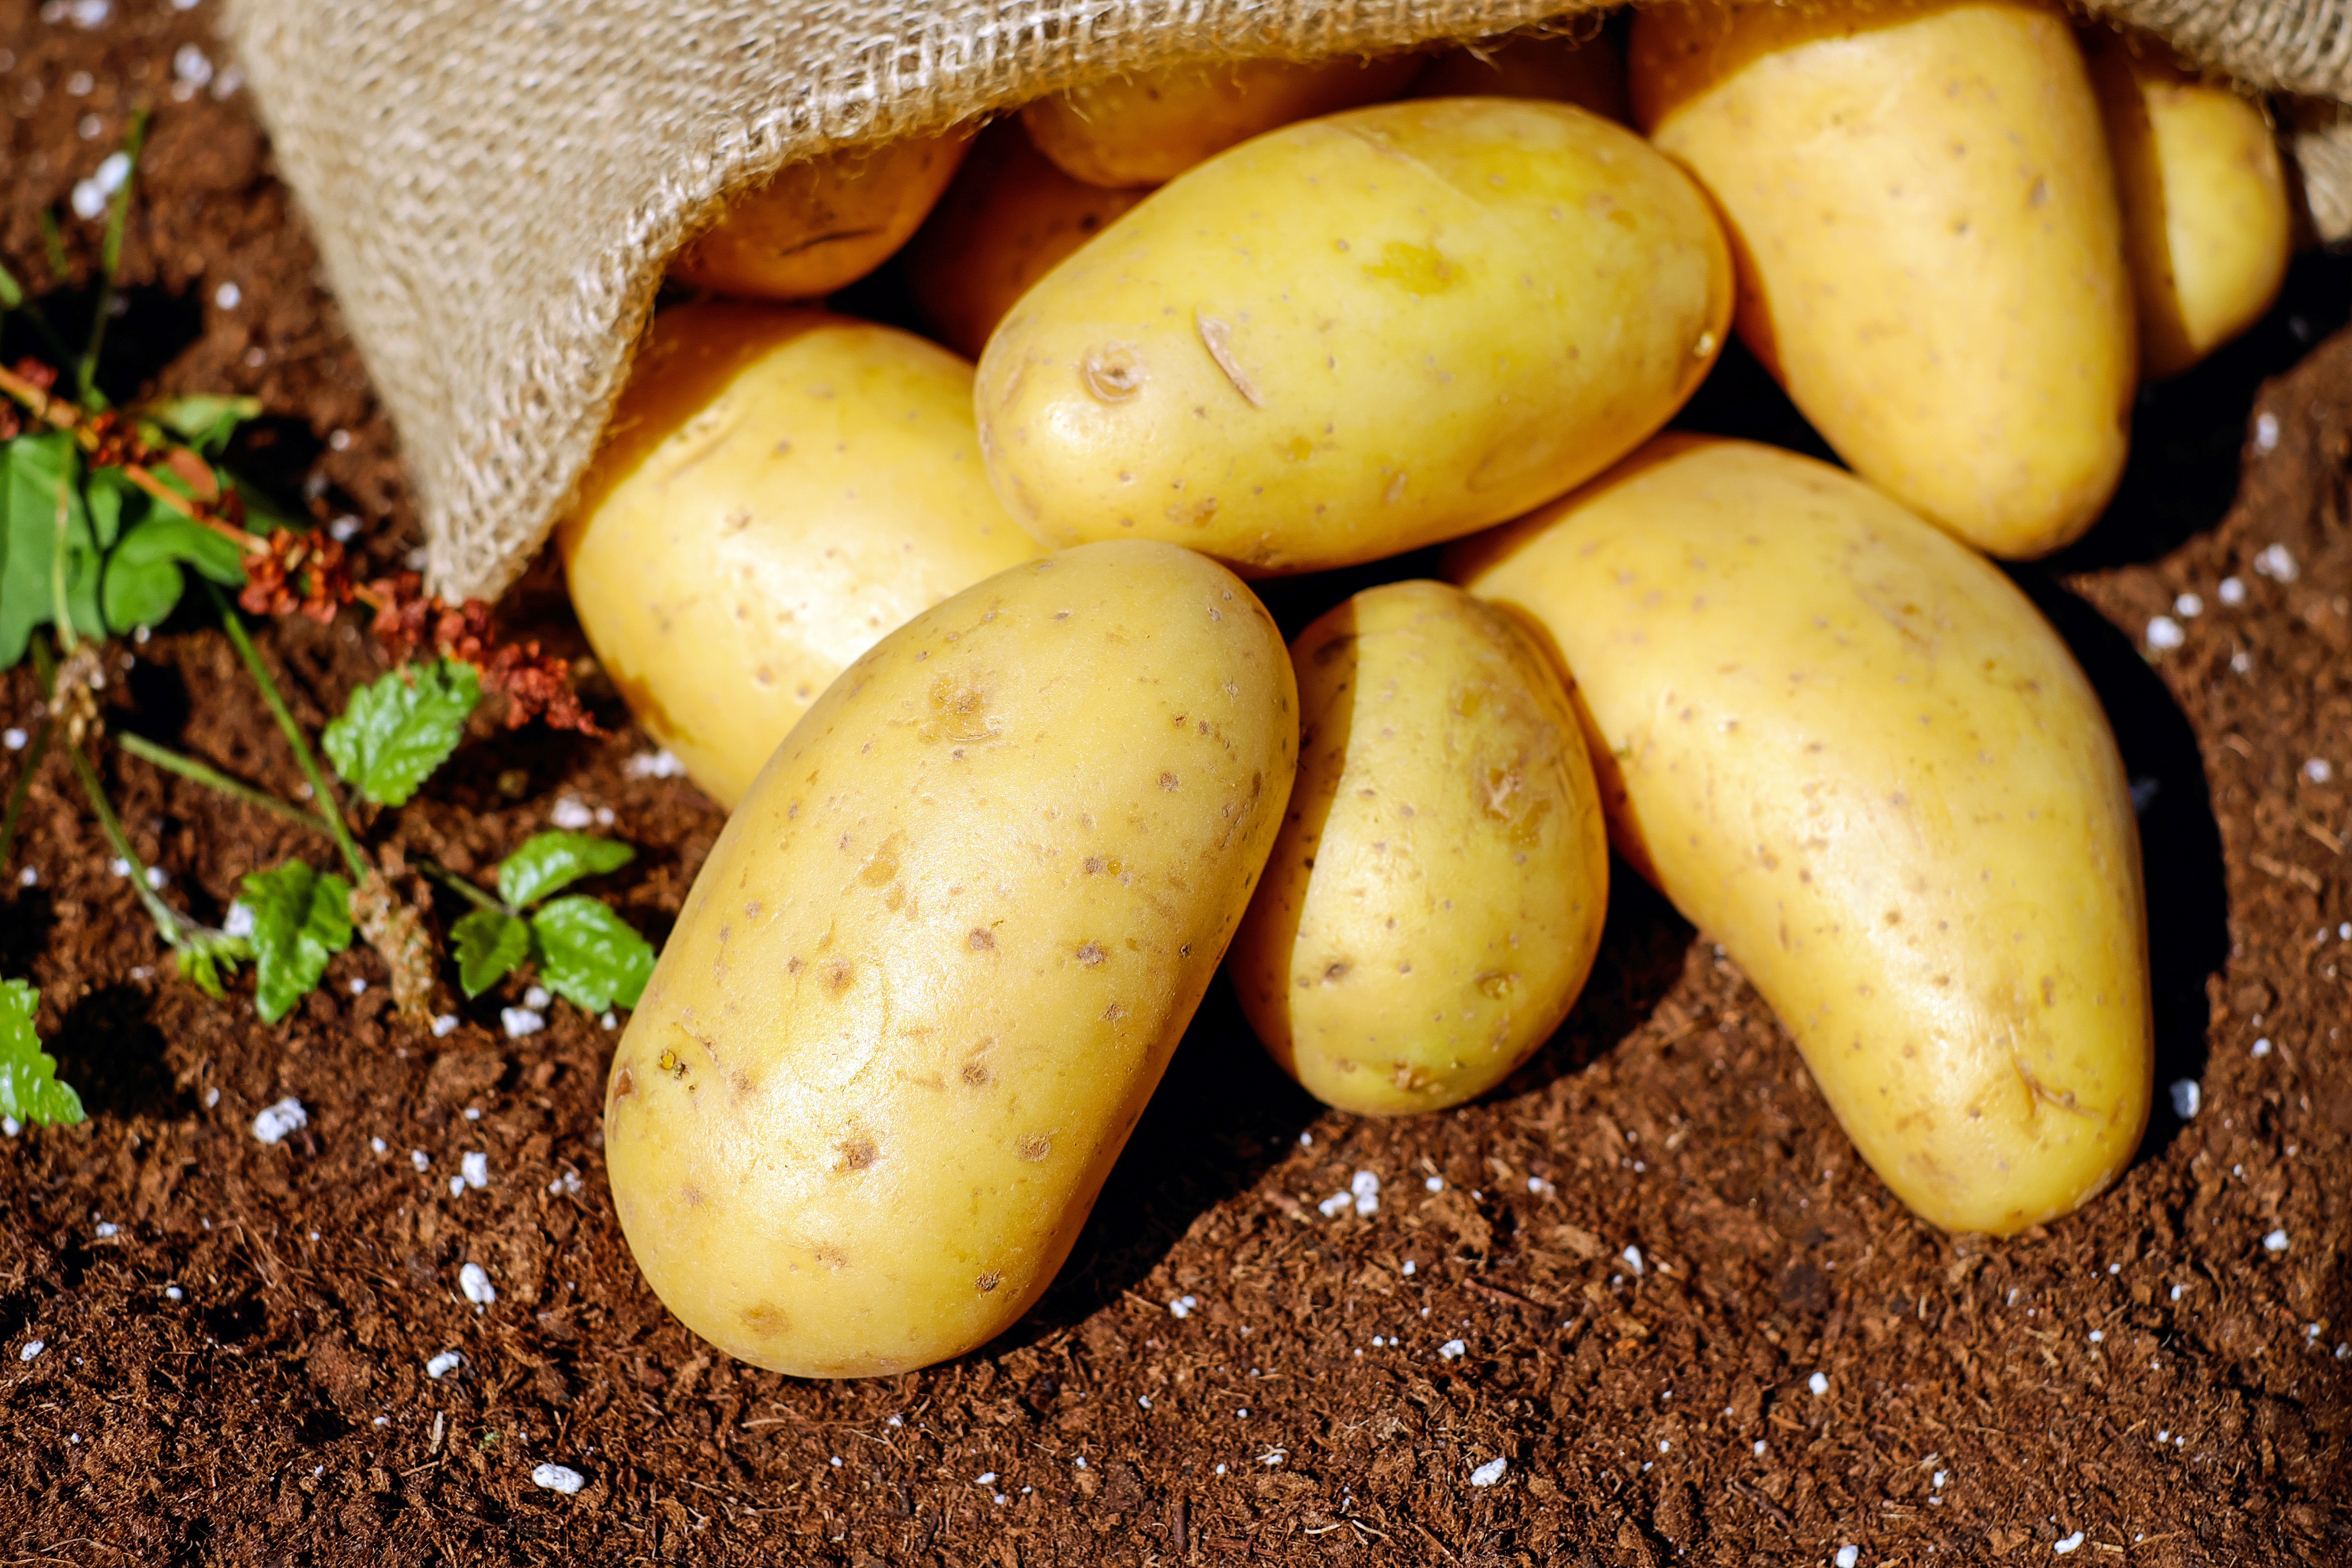 A burlap bag of golden potatoes artfully spilling out onto dirt with small green sprouting plants.